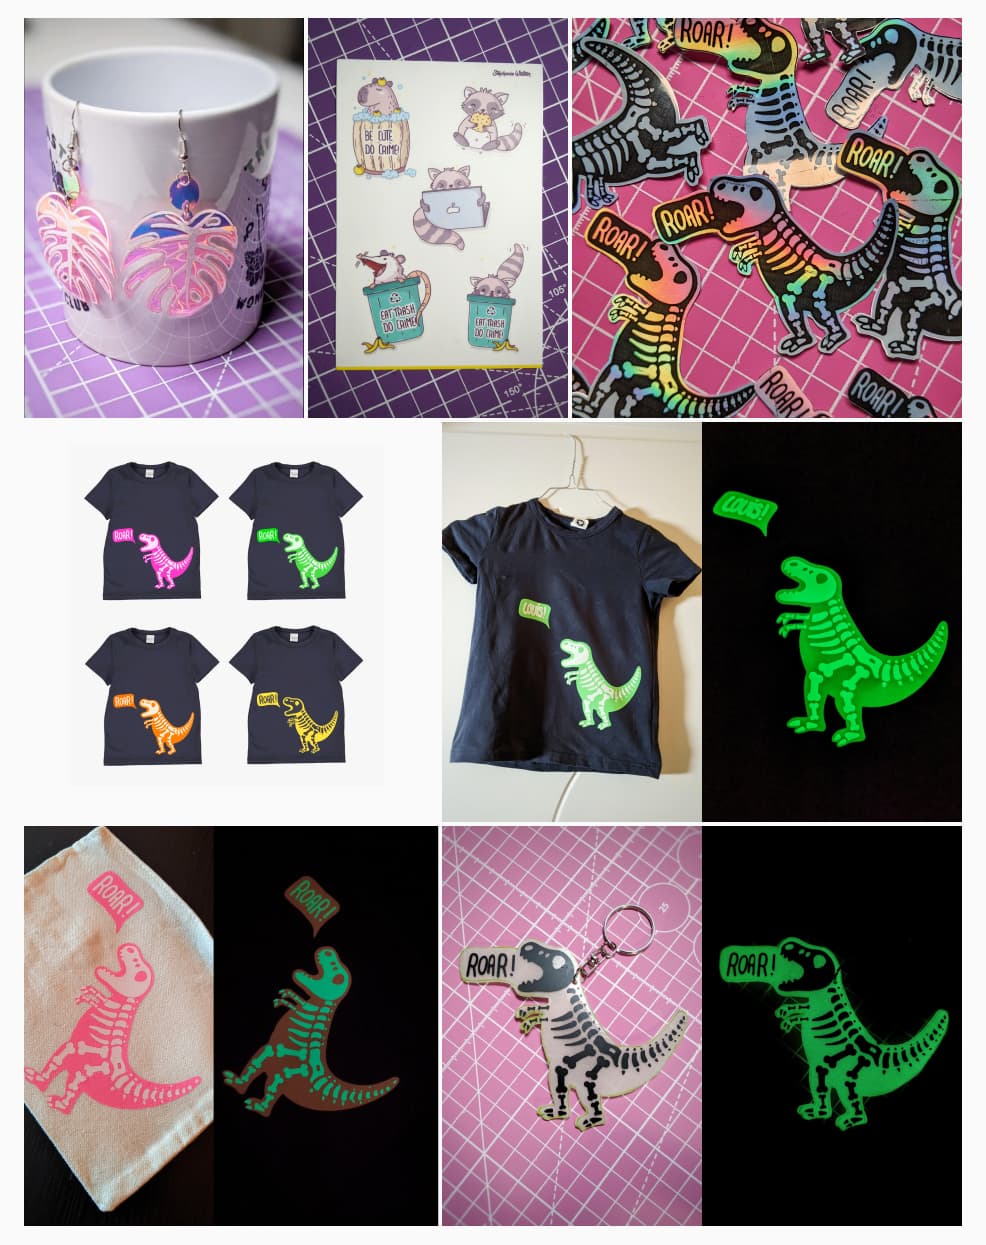 A collage with iridescent earings, some animal stickers, dinosaur stickers, glow in the dark dinosaur shirt and pencil case, glow in the dark dino keychain